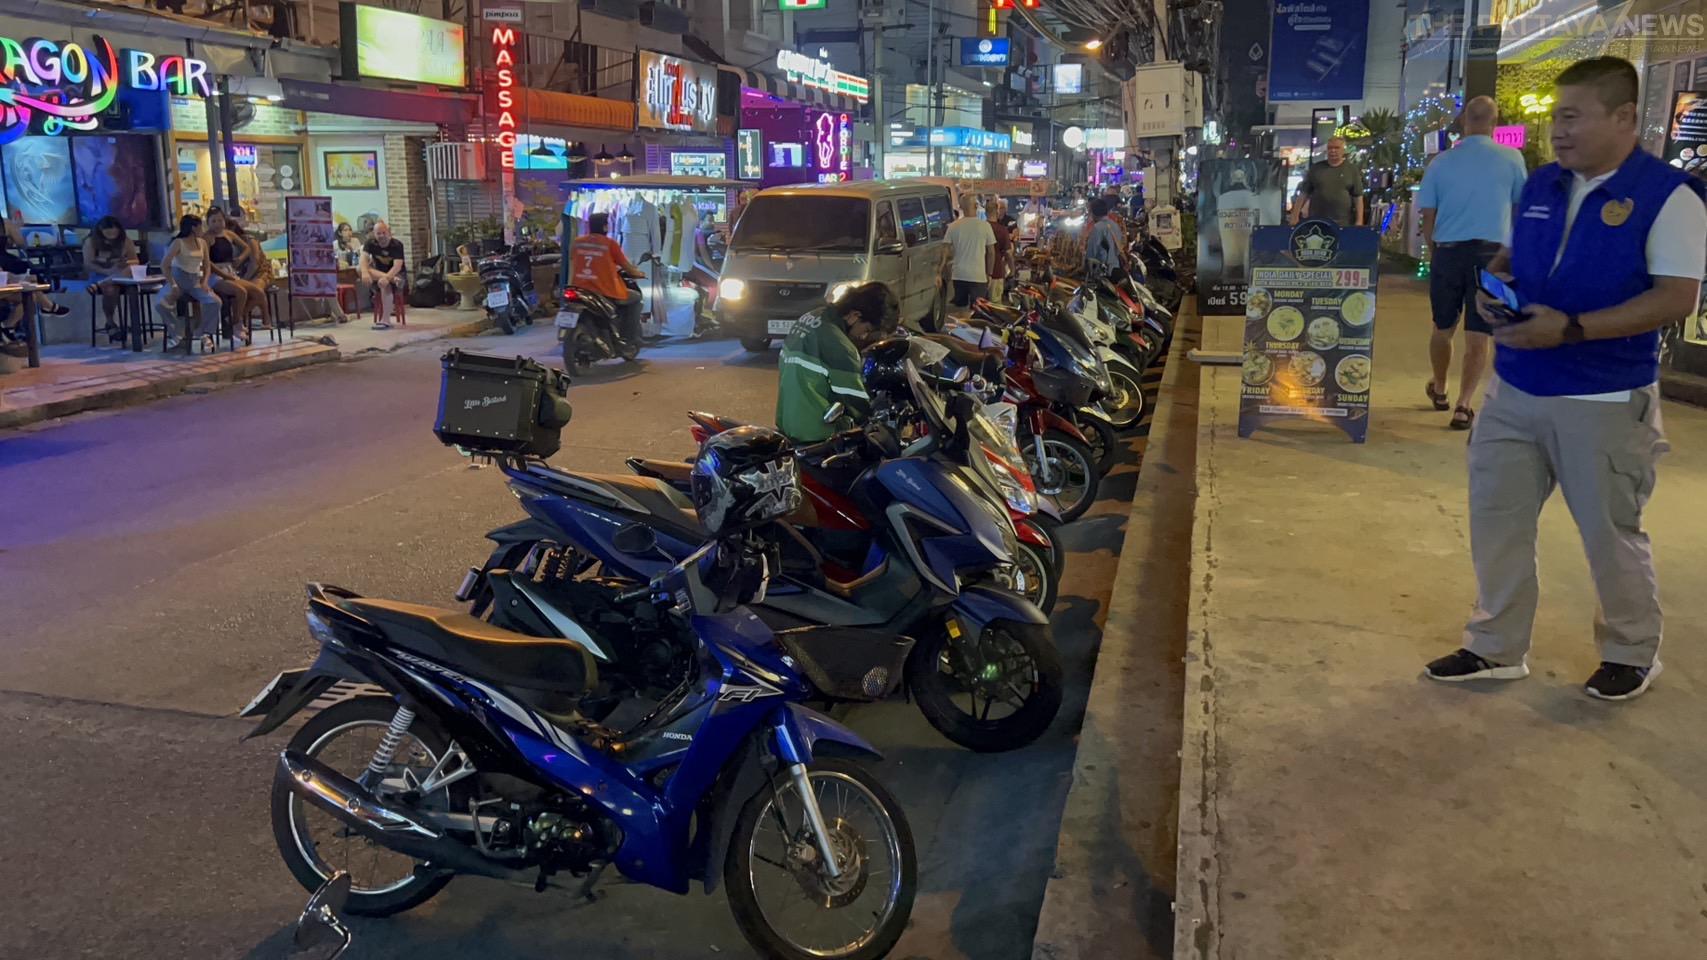 traffic-problems-continue-at-tree-town-market-on-soi-buakhao,-say-pattaya-police-–-the-pattaya-news